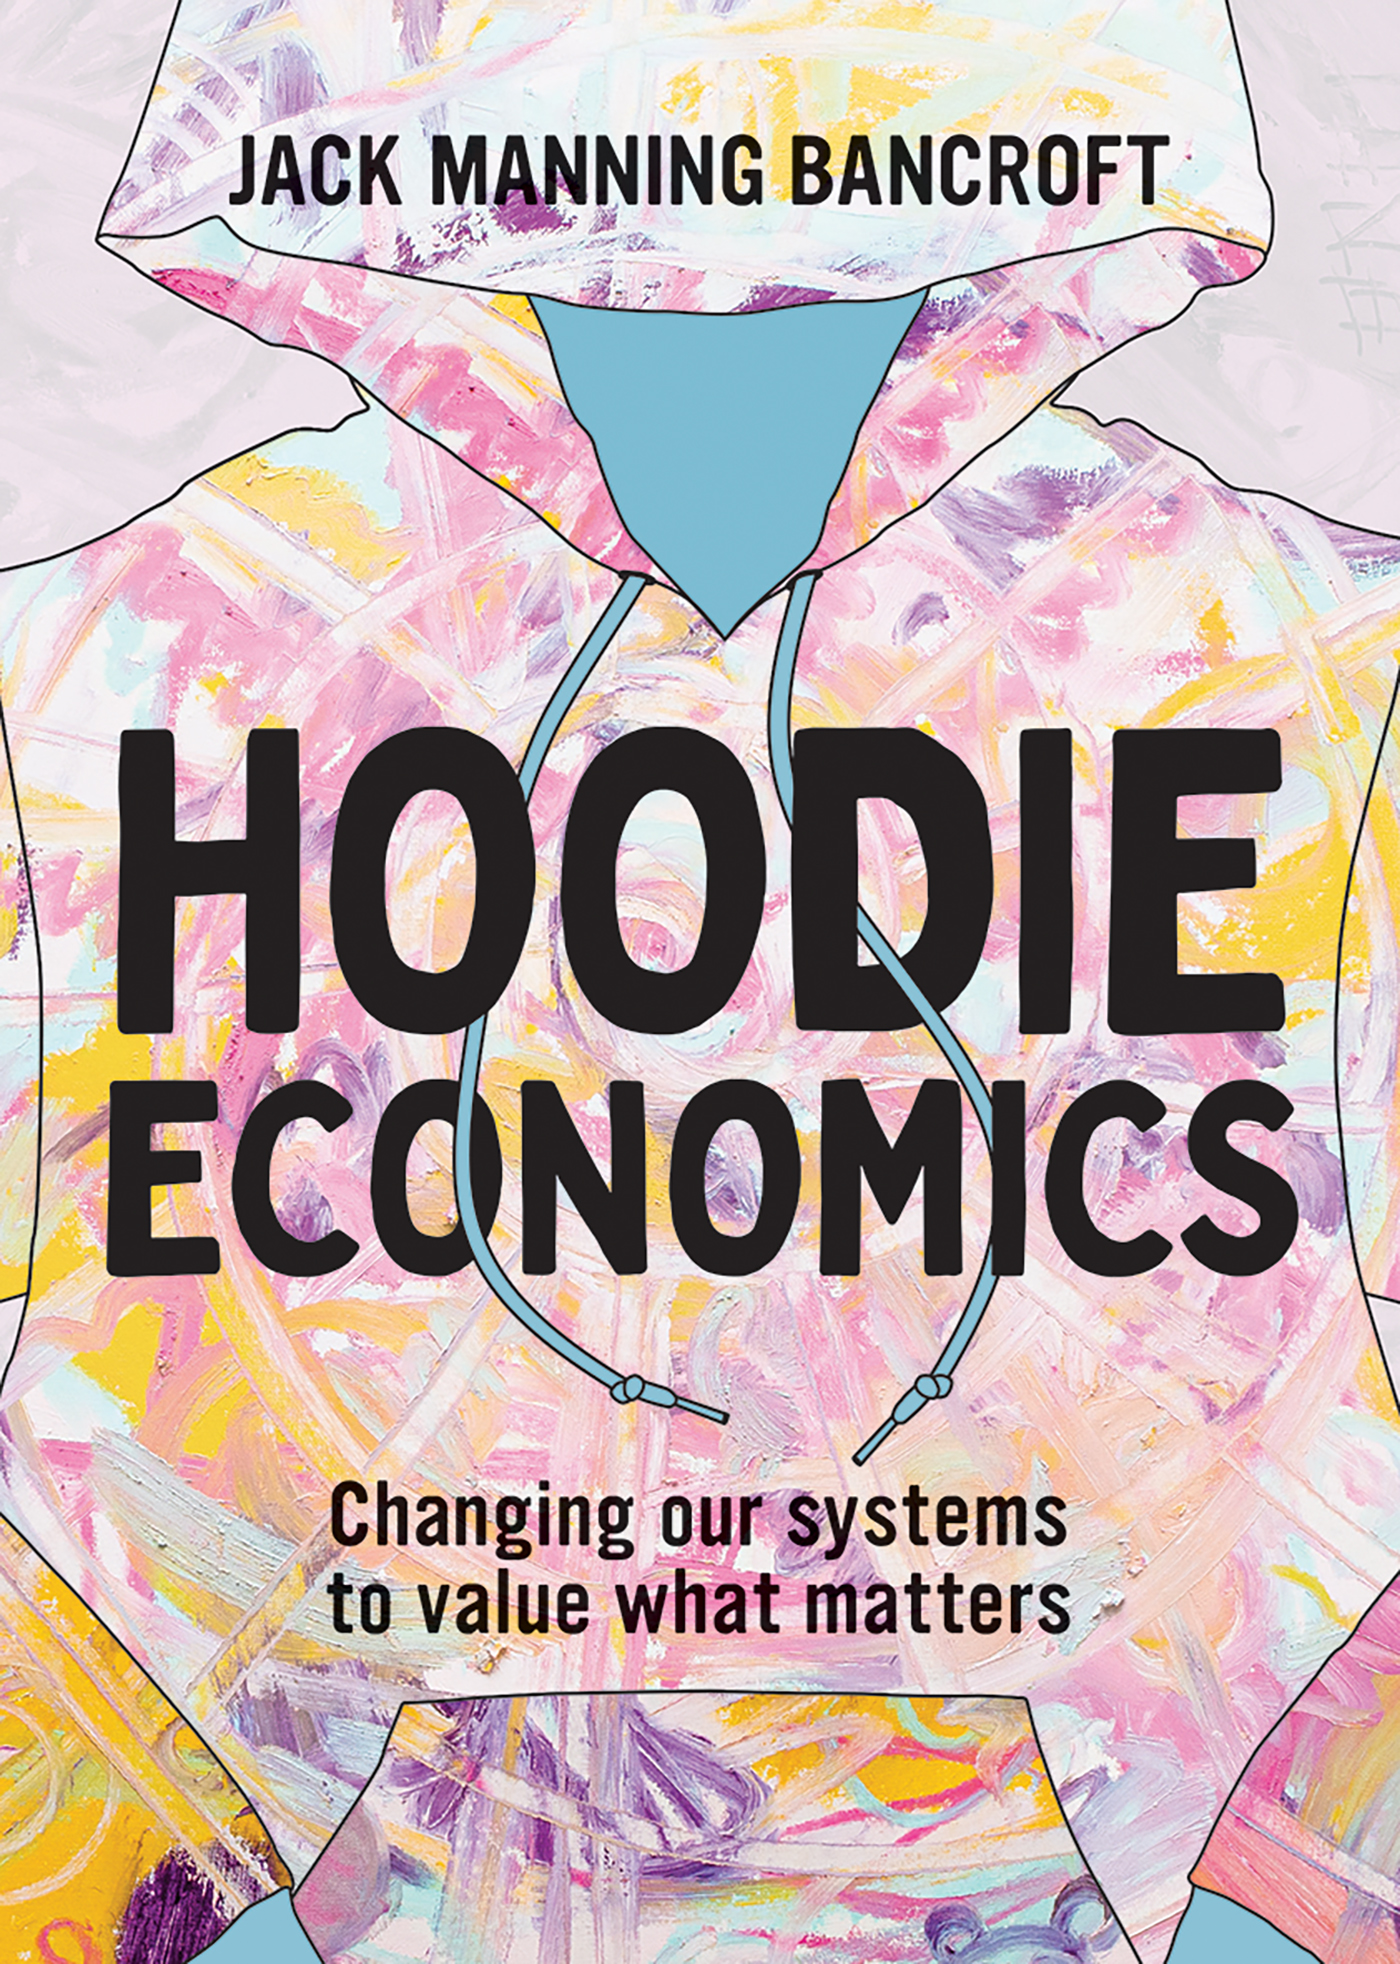 Hoodie Economics: Changing our systems to value what matters